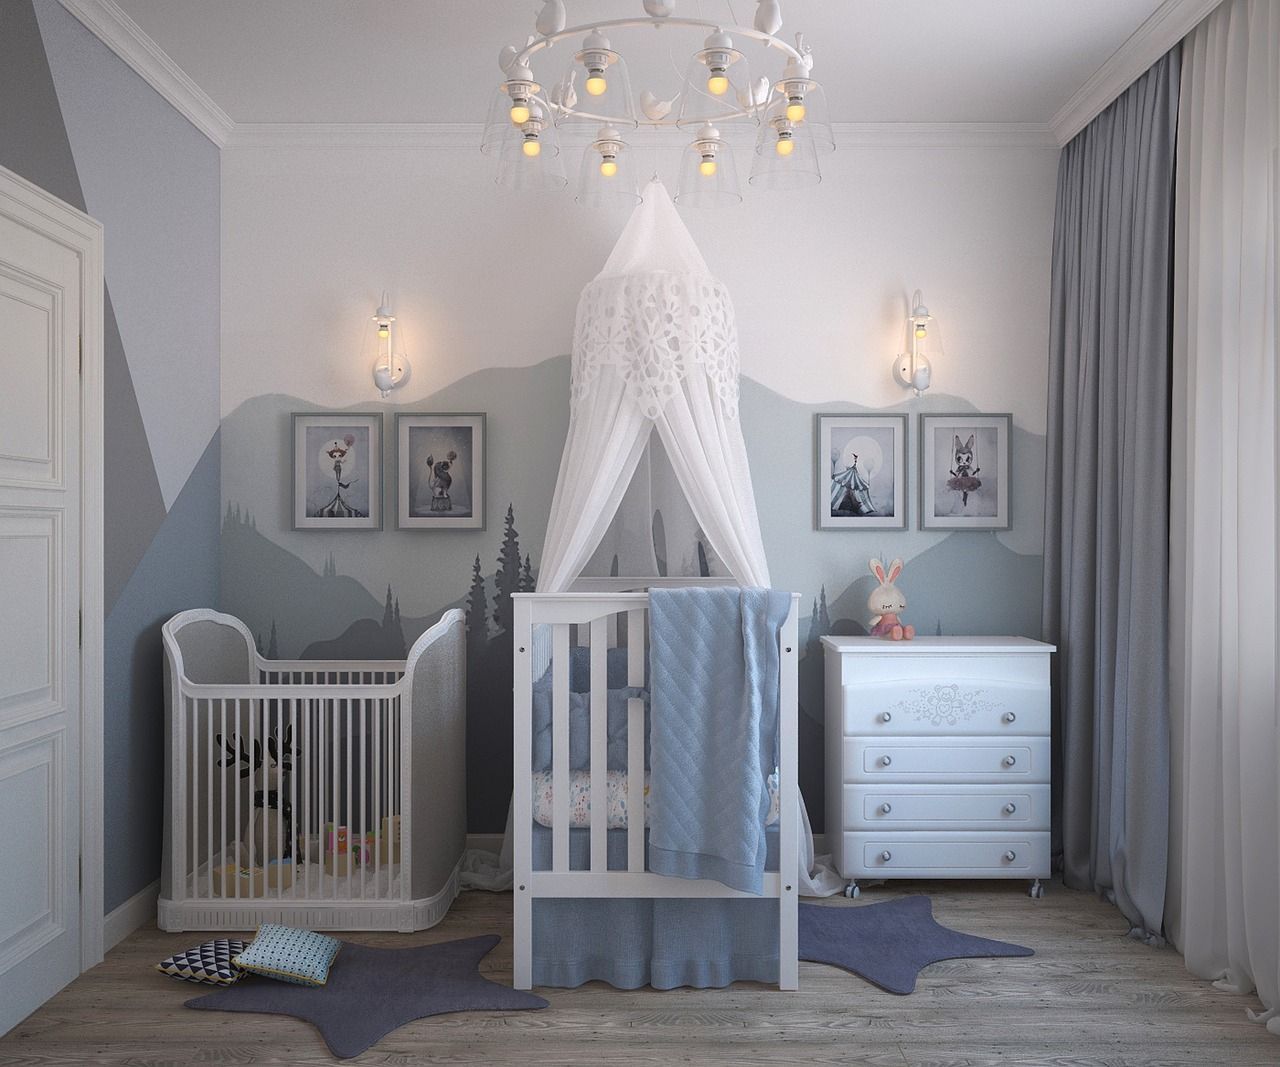 a  baby's room with a crib dresser and chandelier